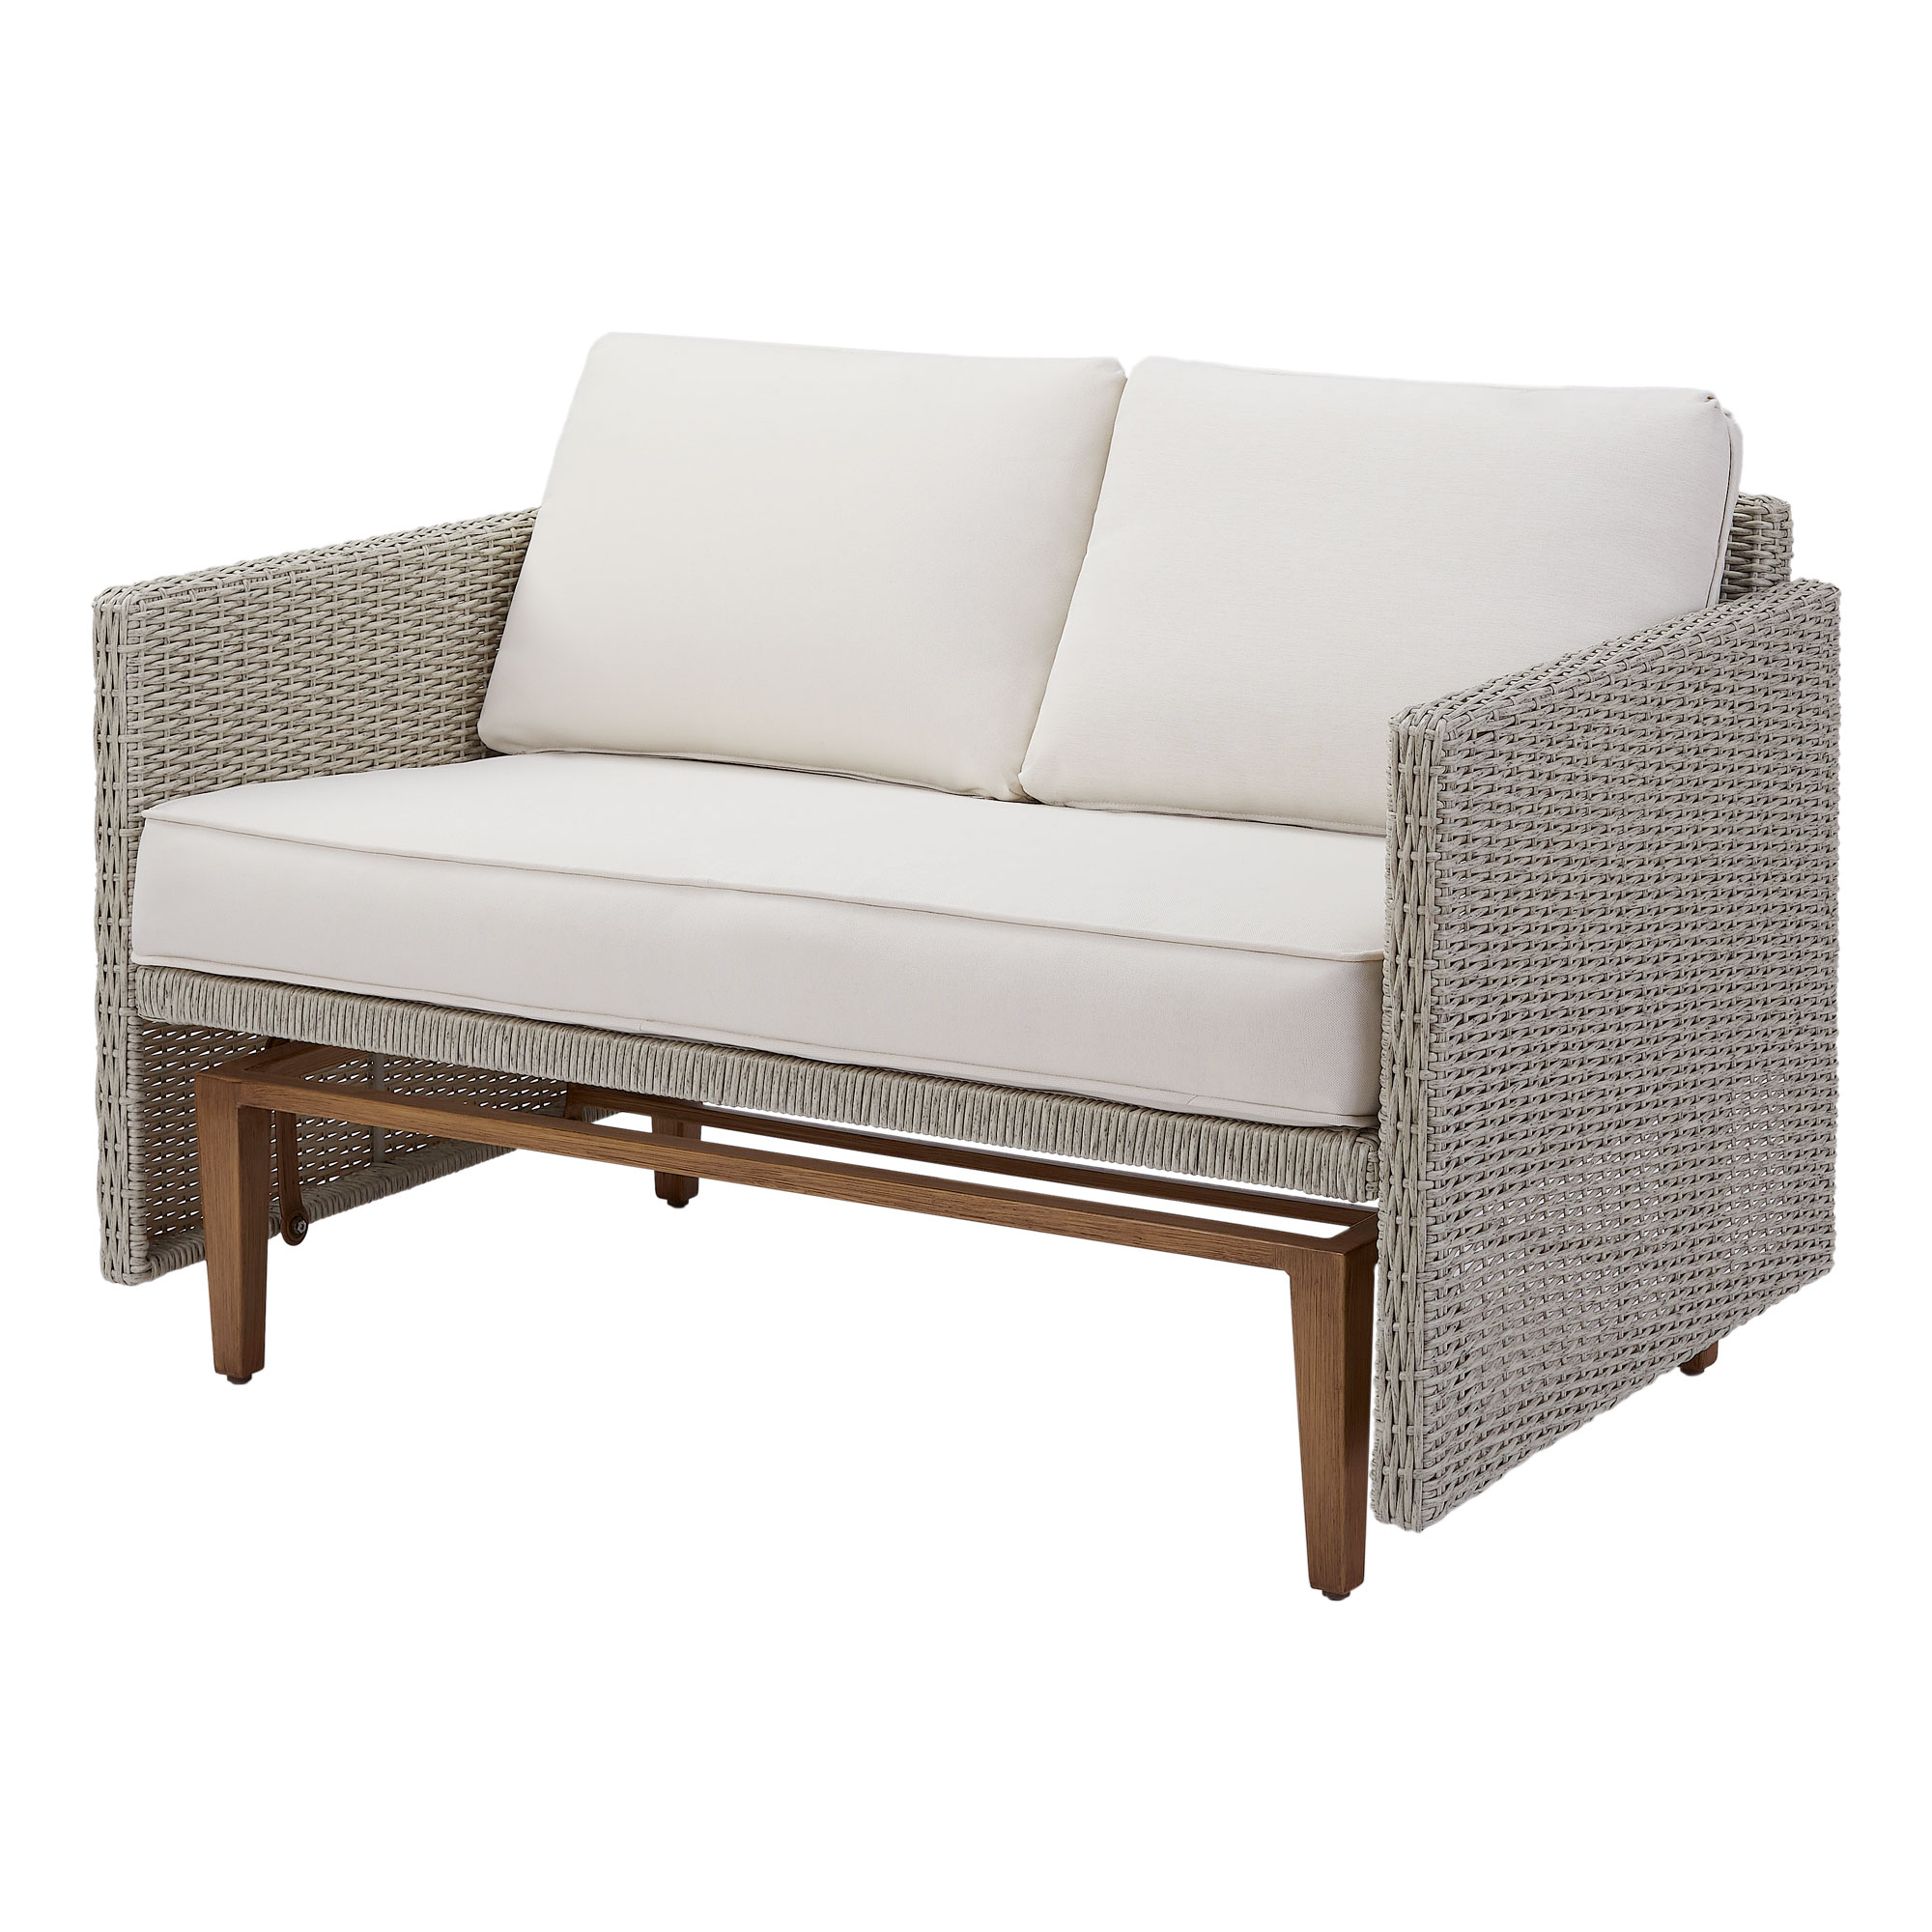 Better Homes & Gardens Davenport Outdoor Loveseat Glider Bench, White and Gray - image 1 of 5